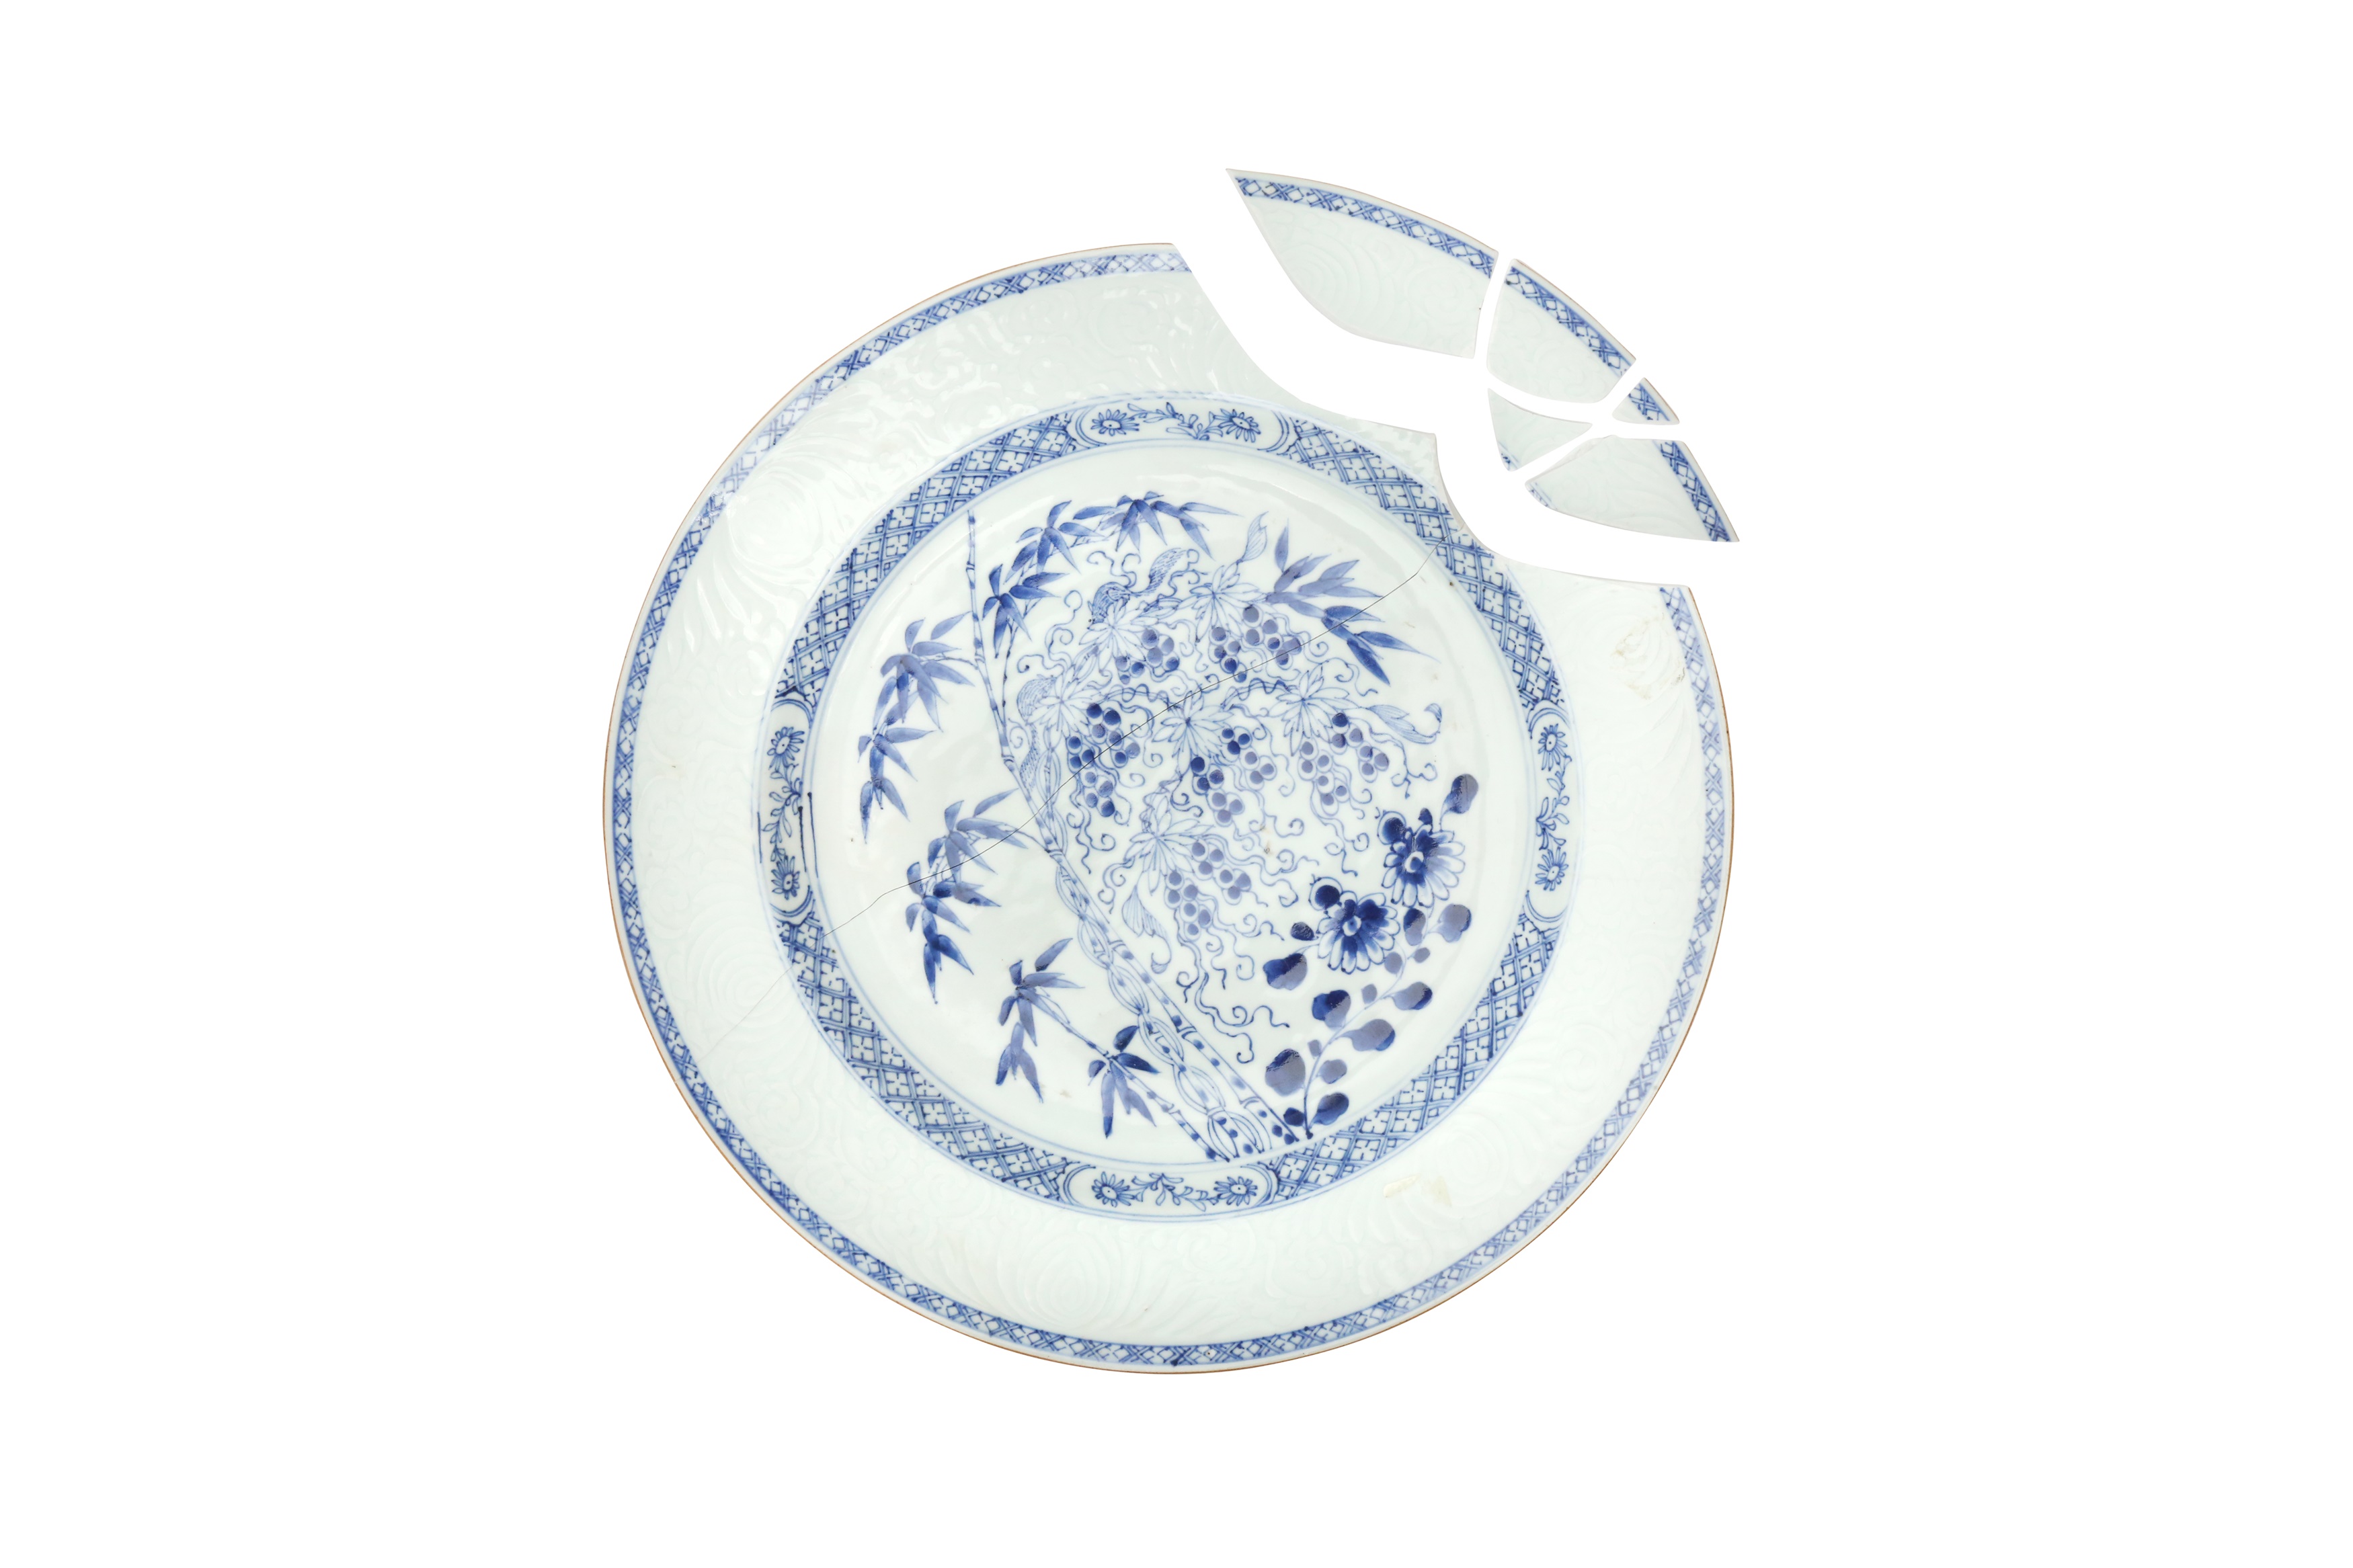 TWO LARGE CHINESE BLUE AND WHITE DISHES 清十八世紀 青花葡萄花竹紋大盤兩件 - Image 3 of 3